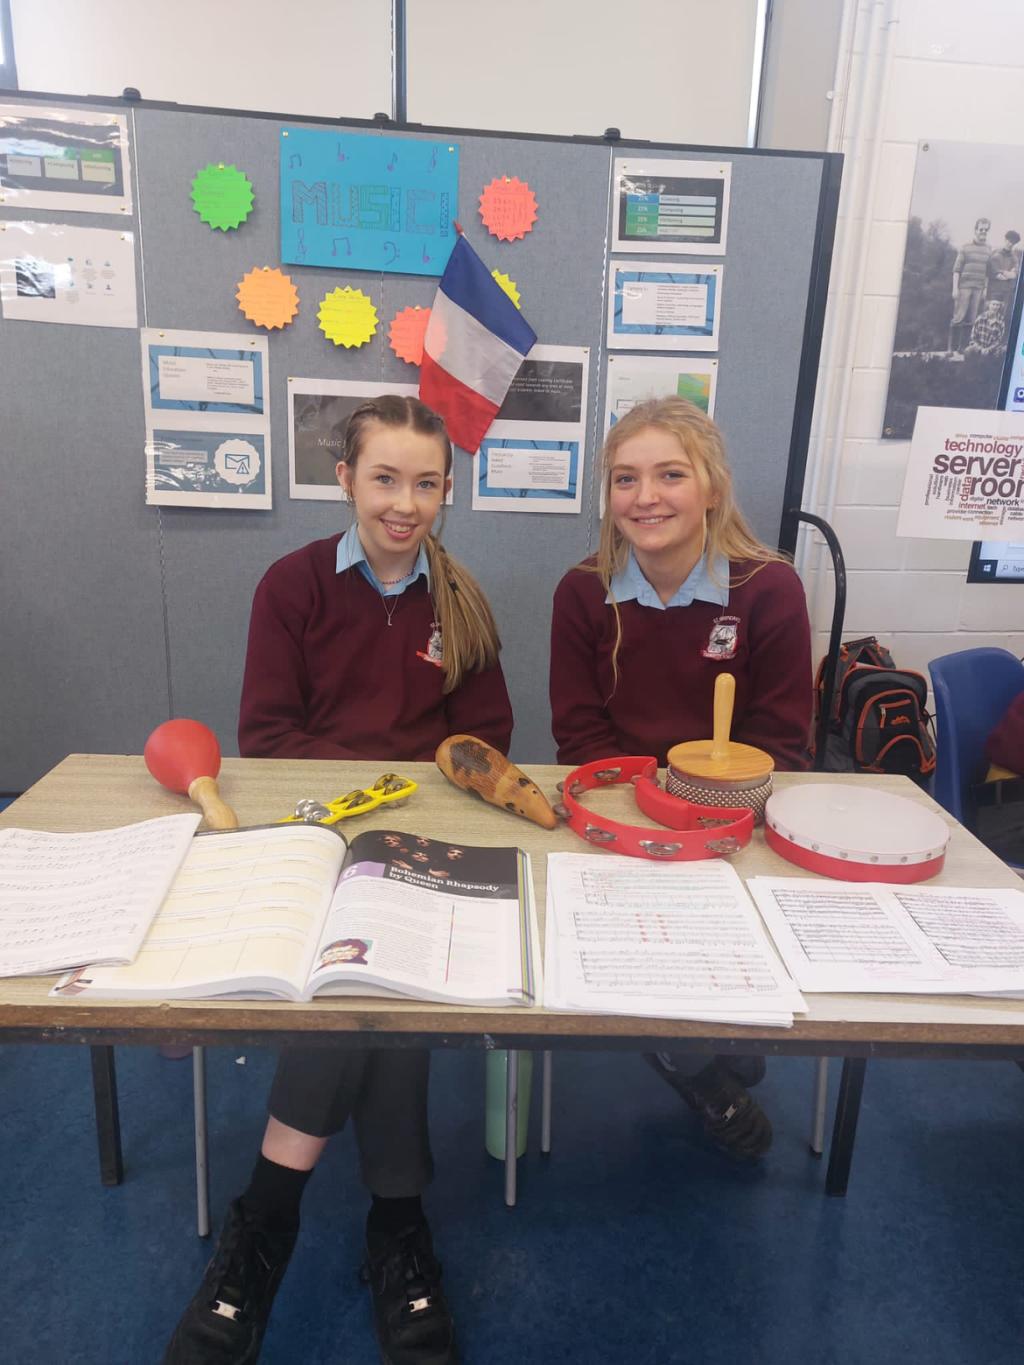 More from our Careers' Fair